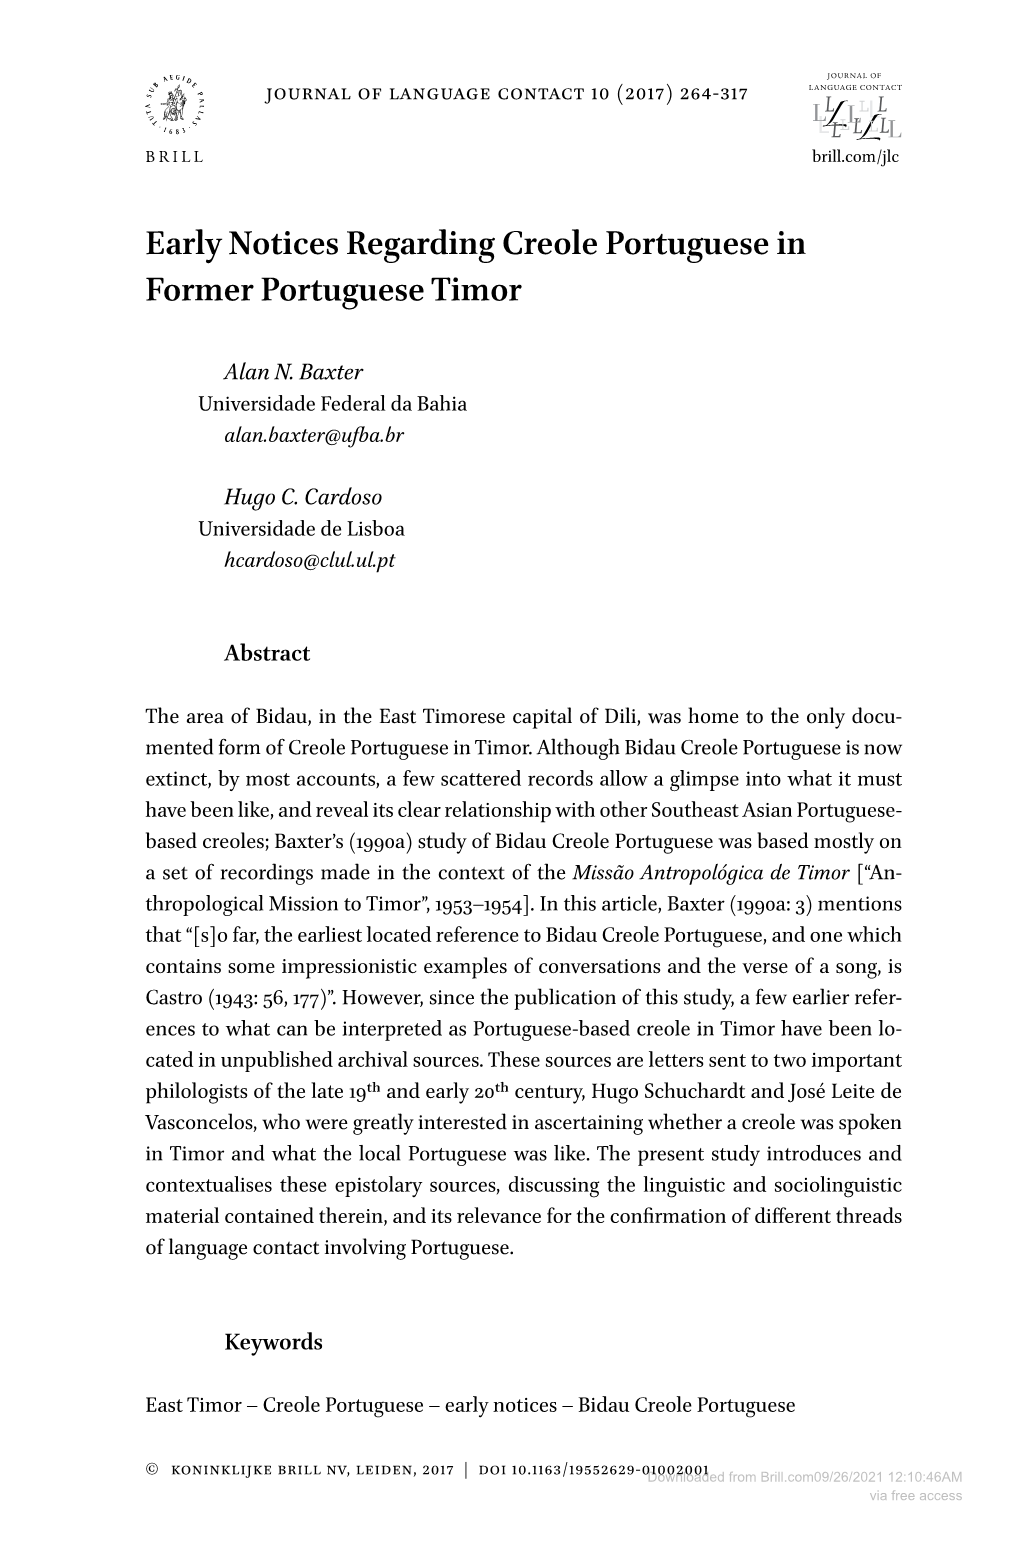 Early Notices Regarding Creole Portuguese in Former Portuguese Timor